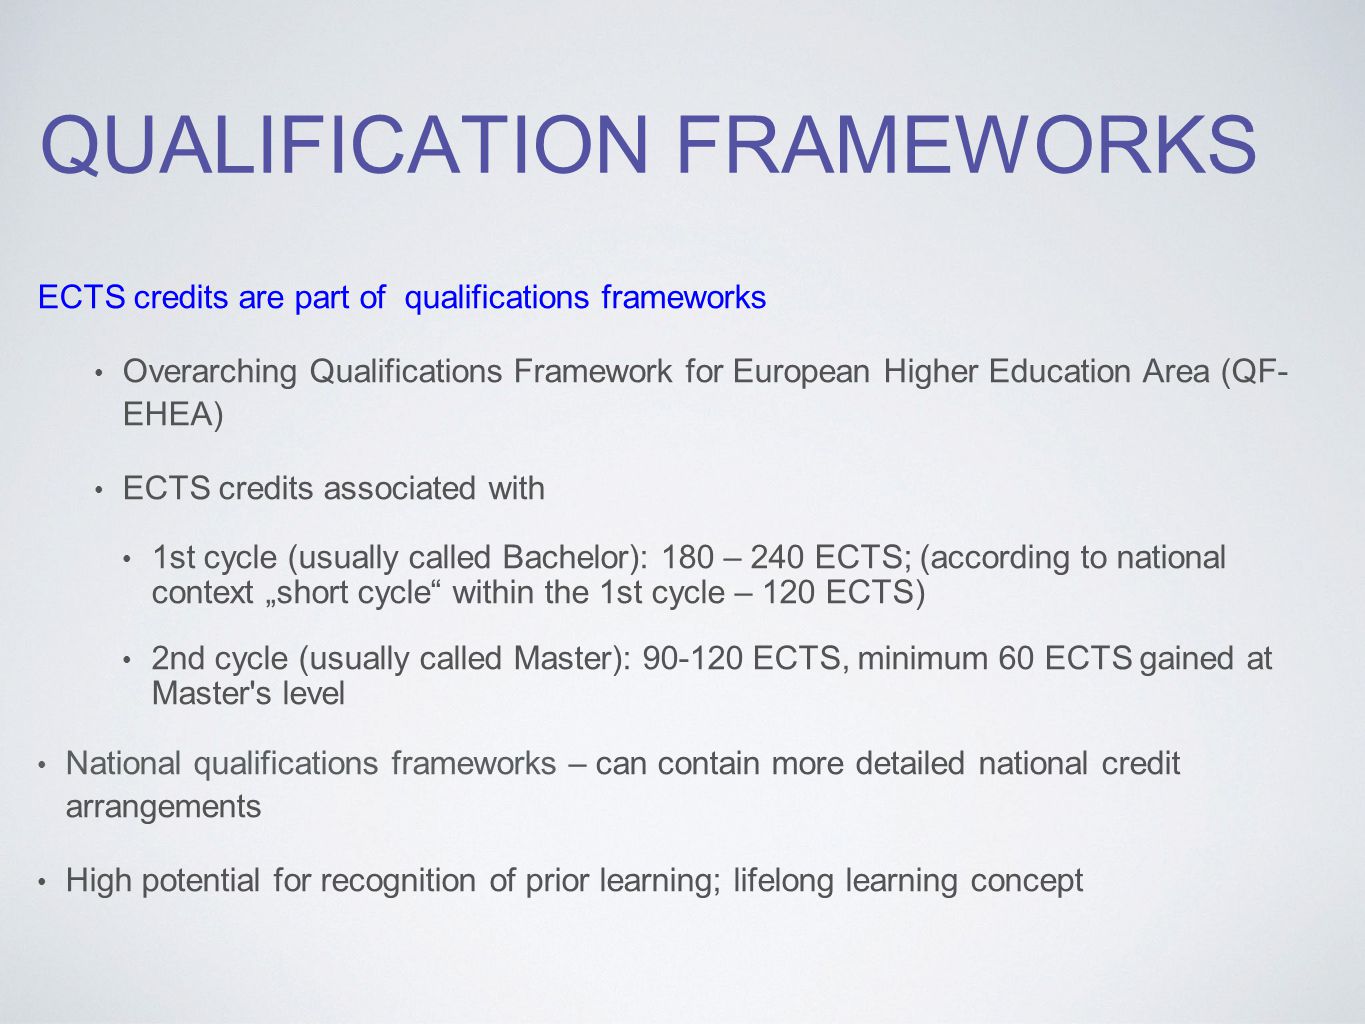 QUALIFICATION FRAMEWORKS ECTS credits are part of qualifications frameworks Overarching Qualifications Framework for European Higher Education Area (QF- EHEA) ECTS credits associated with 1st cycle (usually called Bachelor): 180 – 240 ECTS; (according to national context „short cycle within the 1st cycle – 120 ECTS) 2nd cycle (usually called Master): ECTS, minimum 60 ECTS gained at Master s level National qualifications frameworks – can contain more detailed national credit arrangements High potential for recognition of prior learning; lifelong learning concept